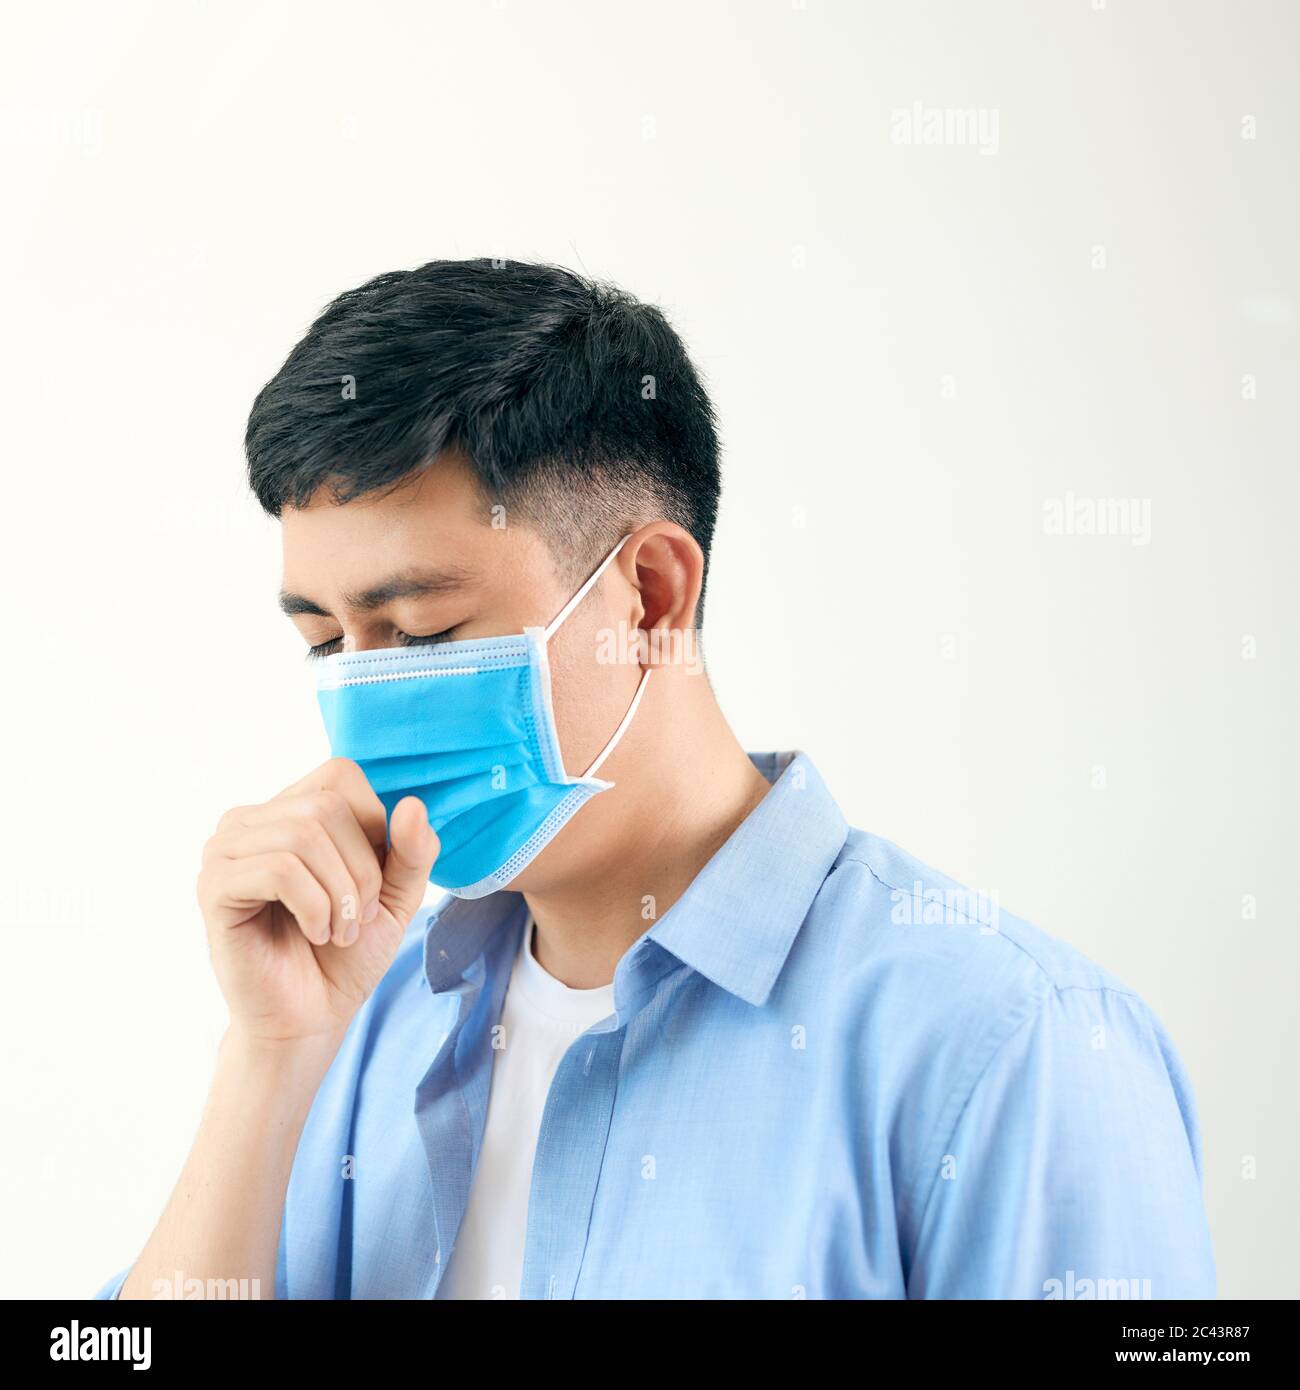 Asian man wearing surgical face mask coughing in subway station with crowded people walking pass. Wuhan coronavirus (COVID-19) outbreak prevention Stock Photo